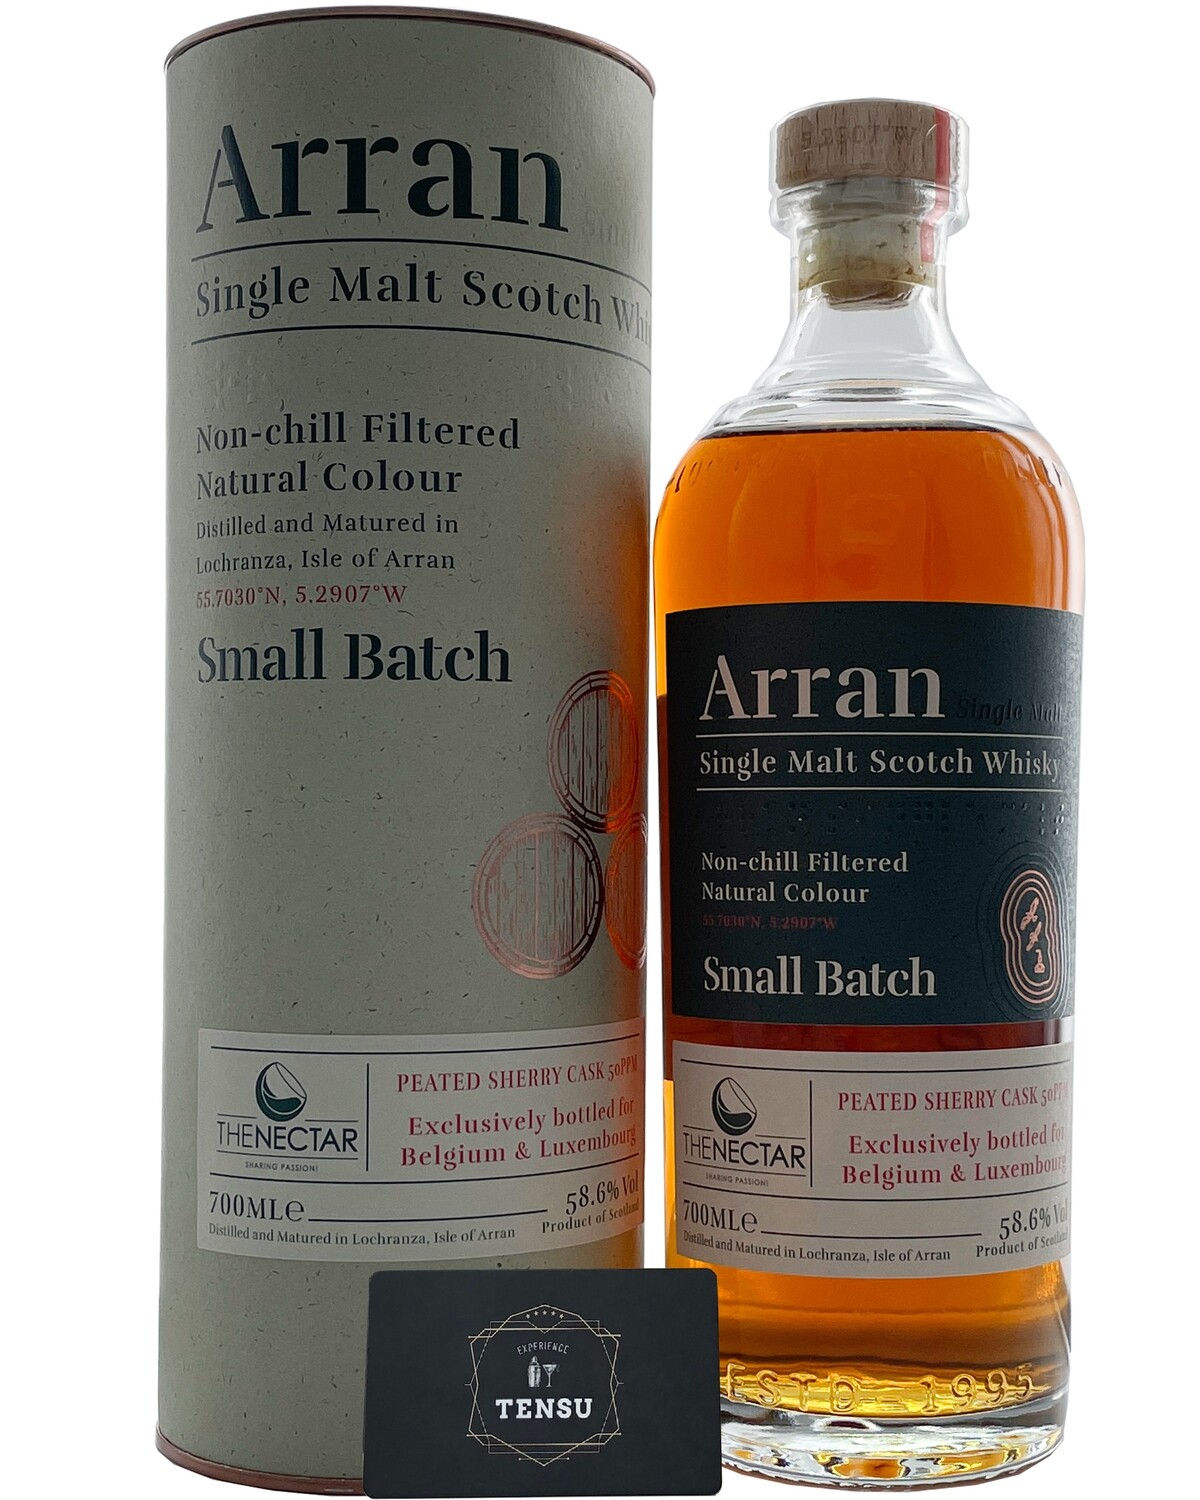 Arran Peated Sherry Cask - Small Batch 2 (Belgium & Luxembourg) 58.6 FTN